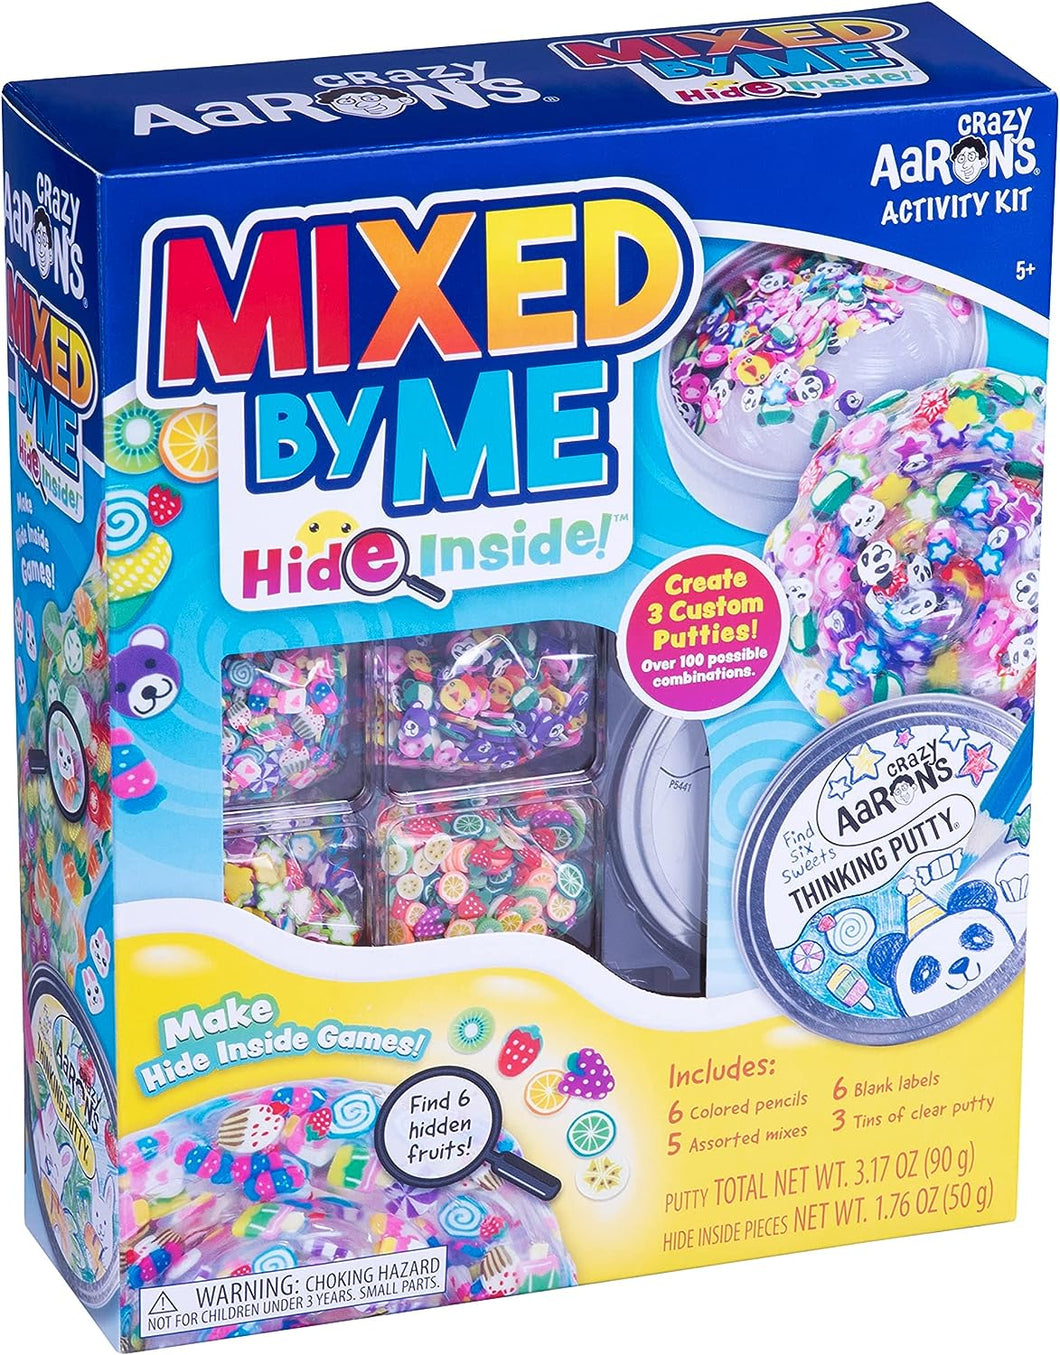 Hide Inside!® Mixed by Me® Kit